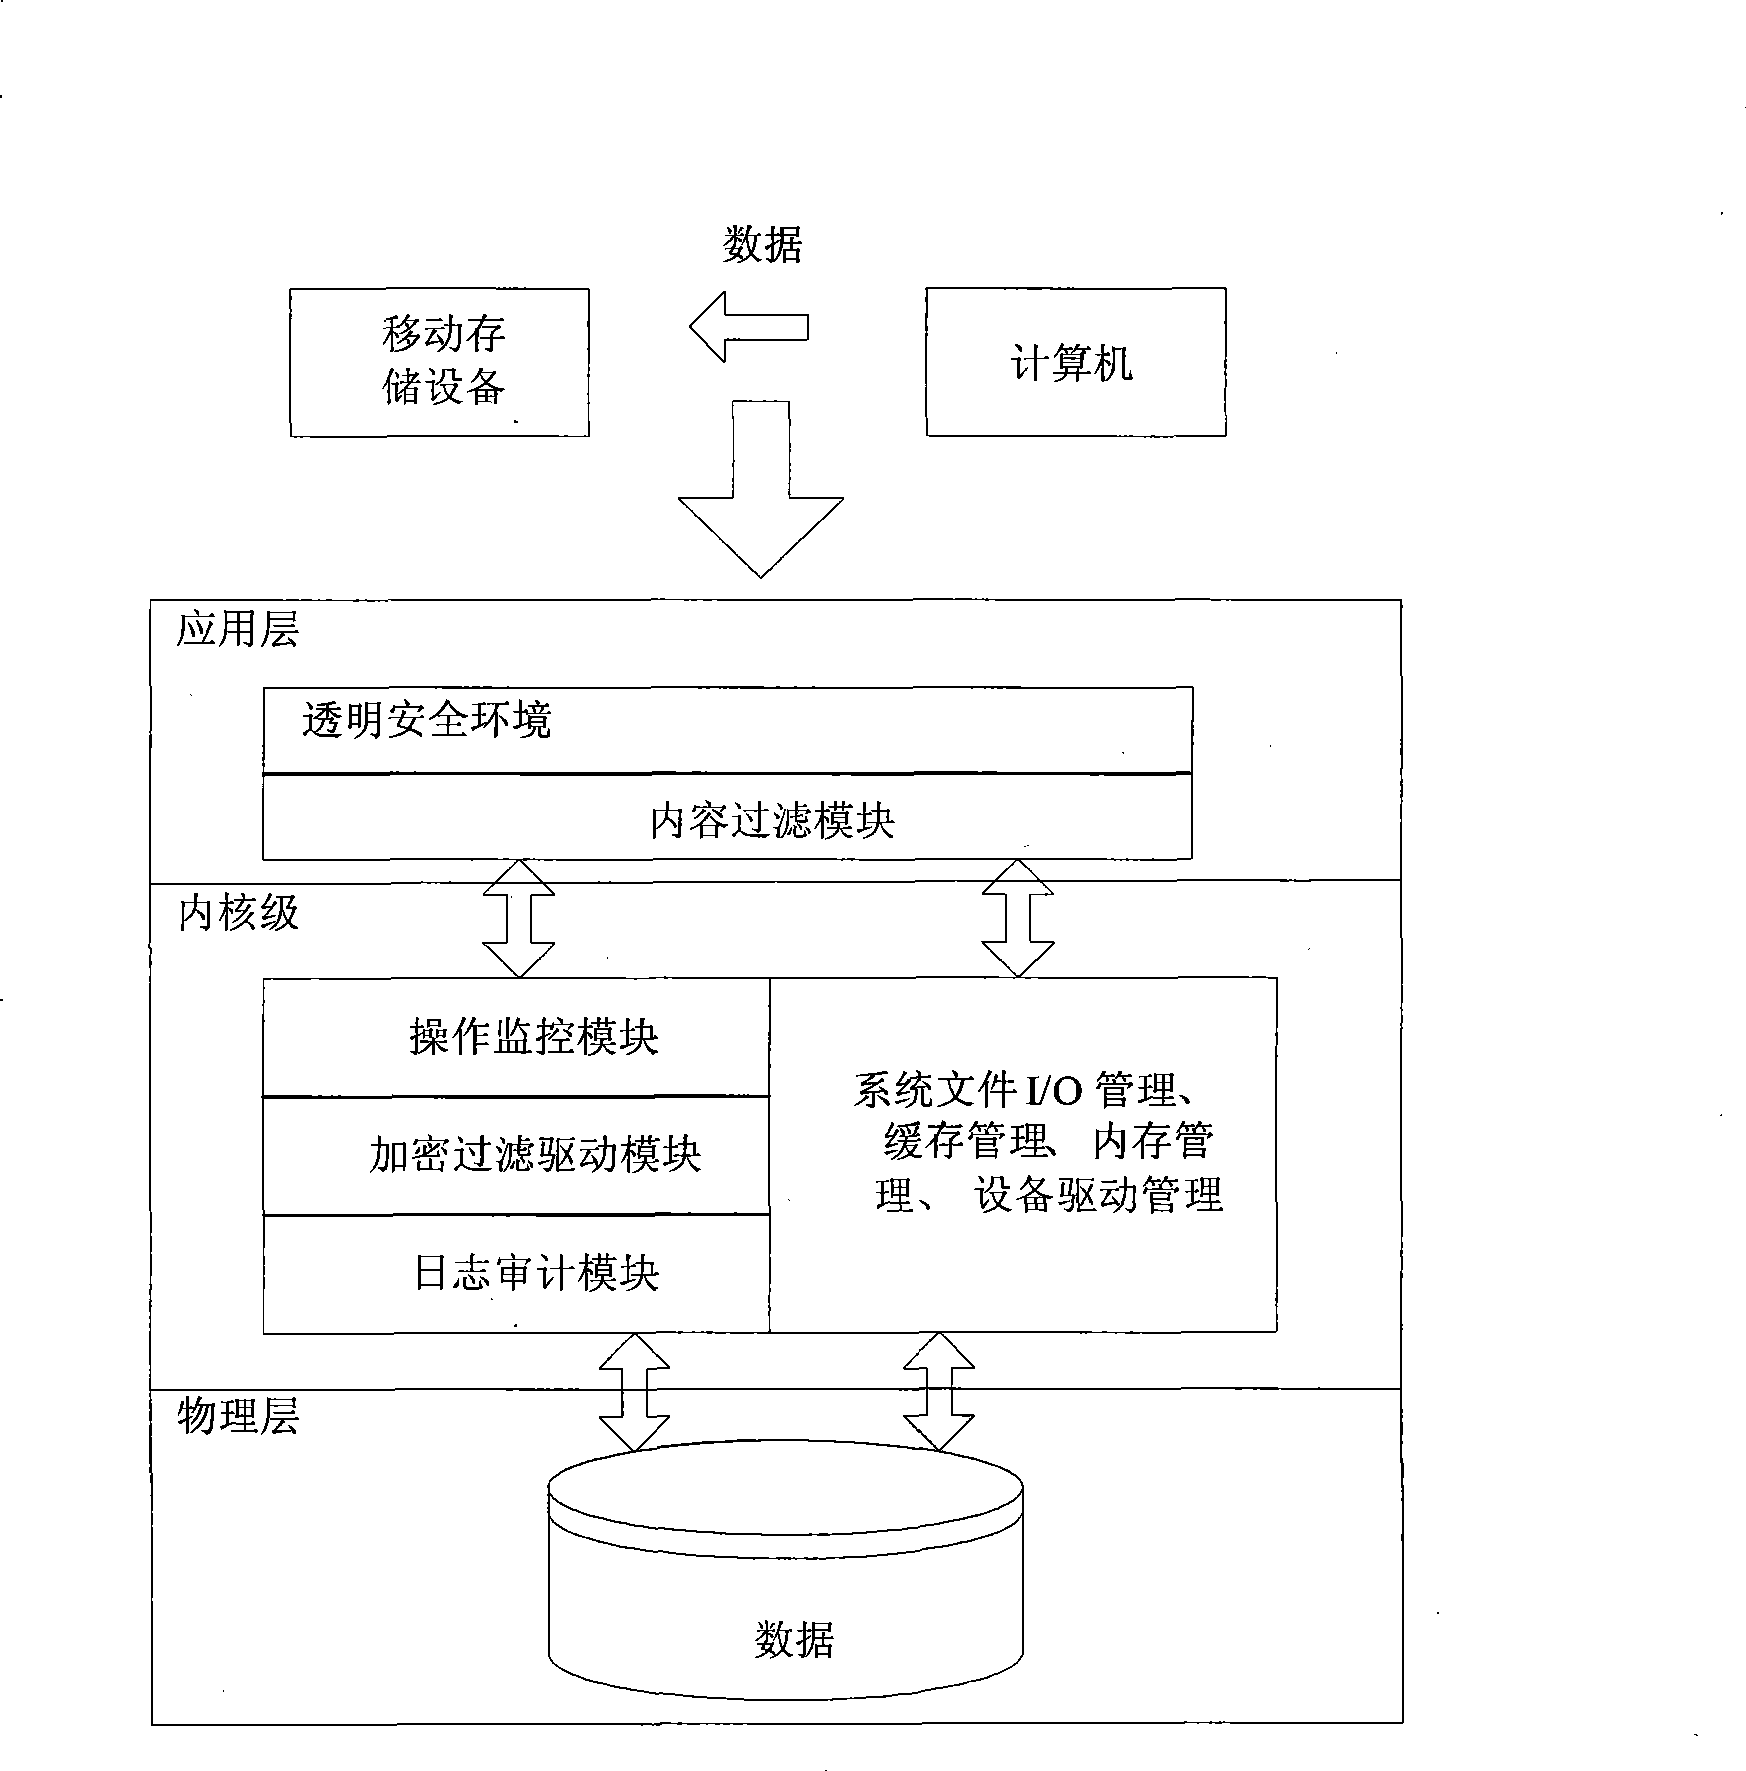 Sensitive data switching control module and method for computer and movable memory device